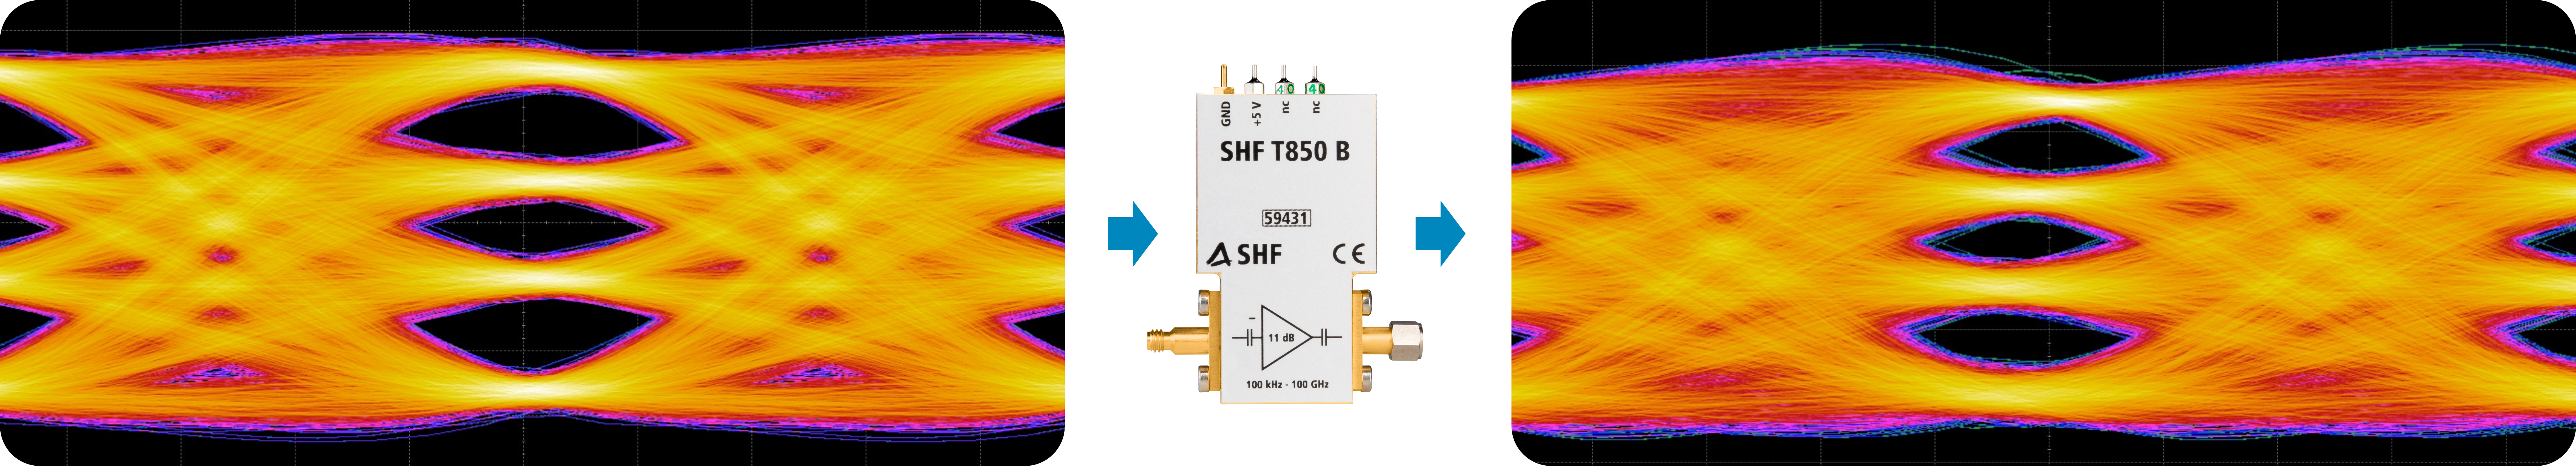 112 GBaud PAM4 input and output of SHF T850 B